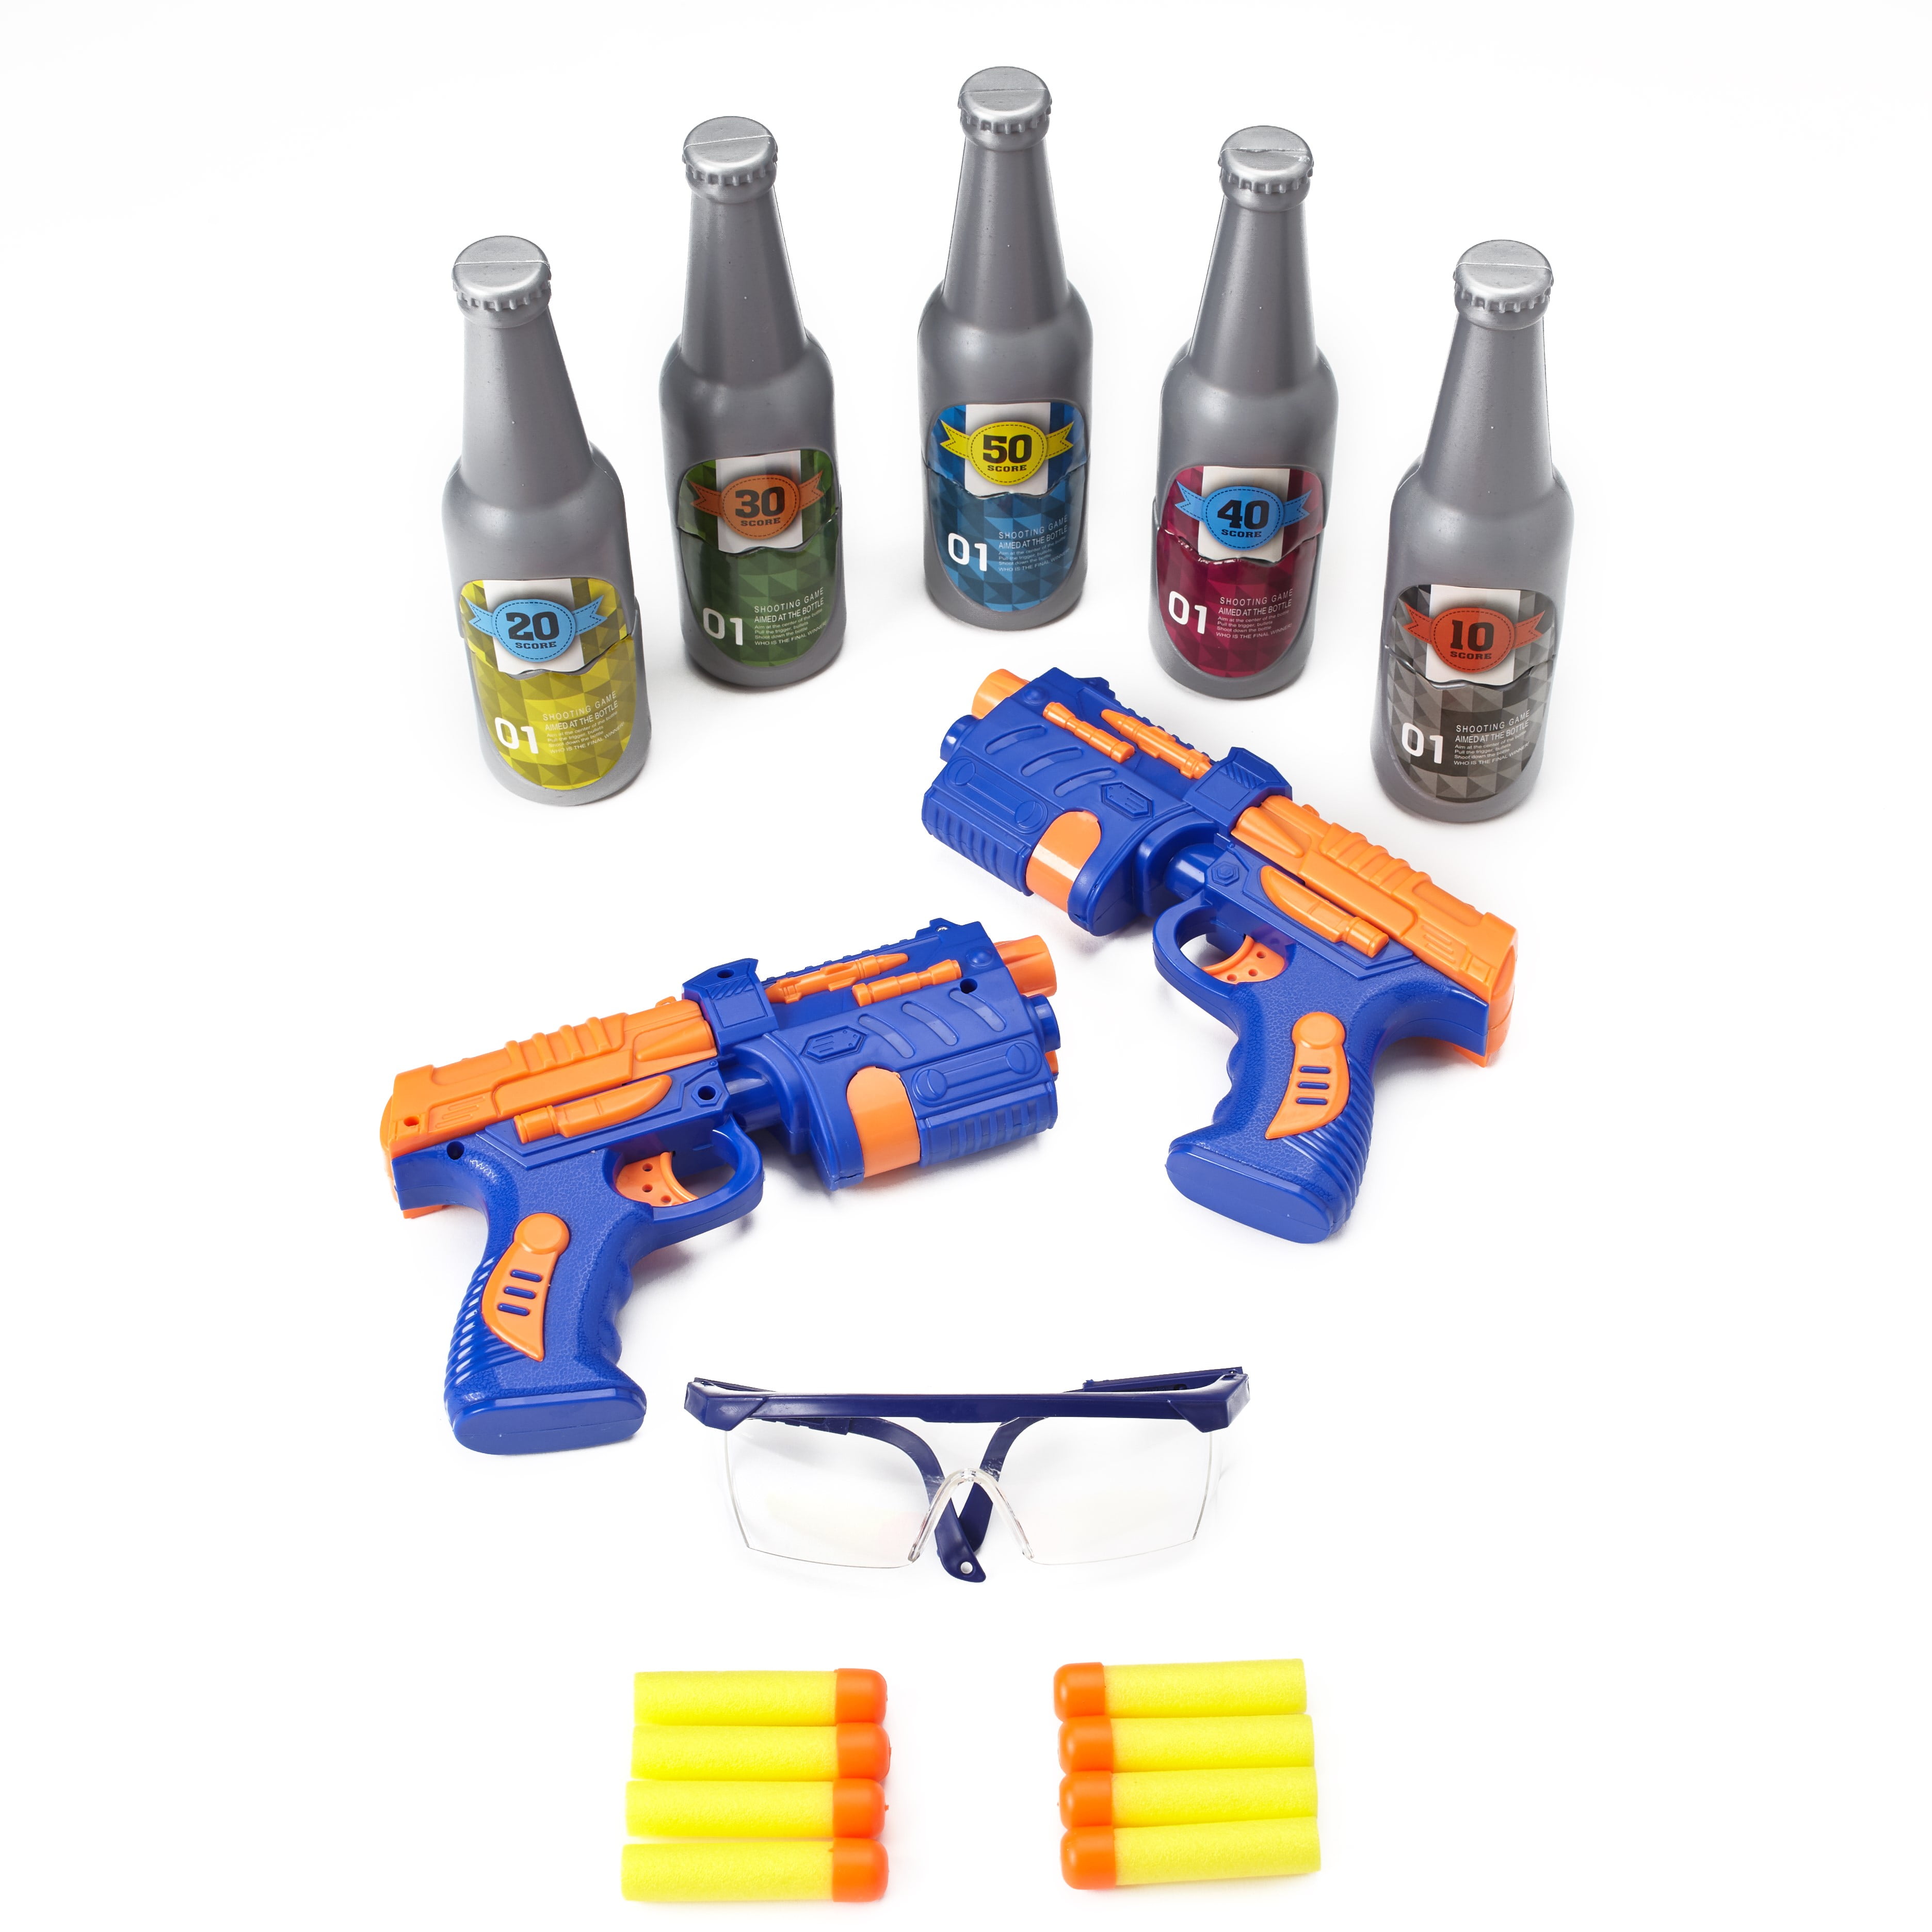 Kids Childrens Fun Game Tin Can Alley Shooting Game Target Games With 2 Toy Guns & 8 Soft Safe Darts Ideal Gift Idea